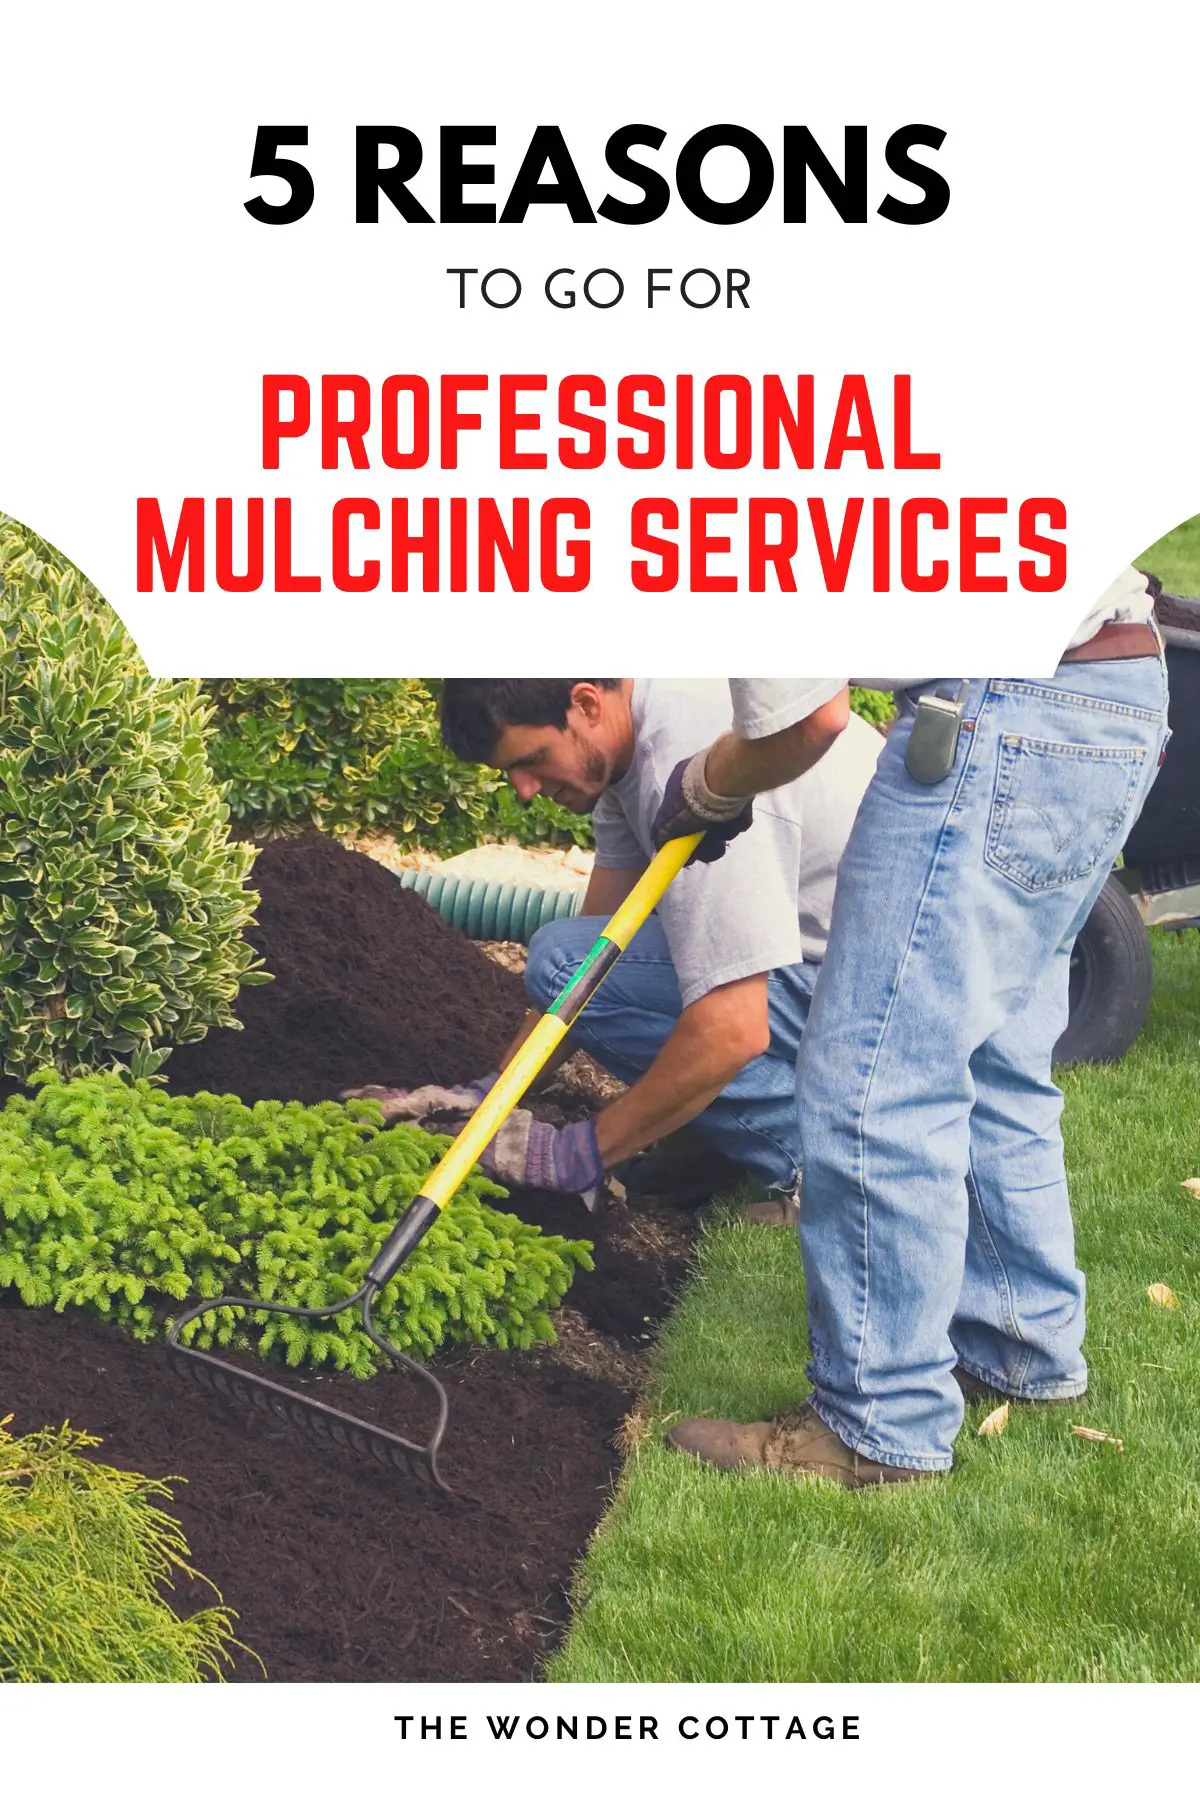 Find The Best Property Maintenance Services For Your Home